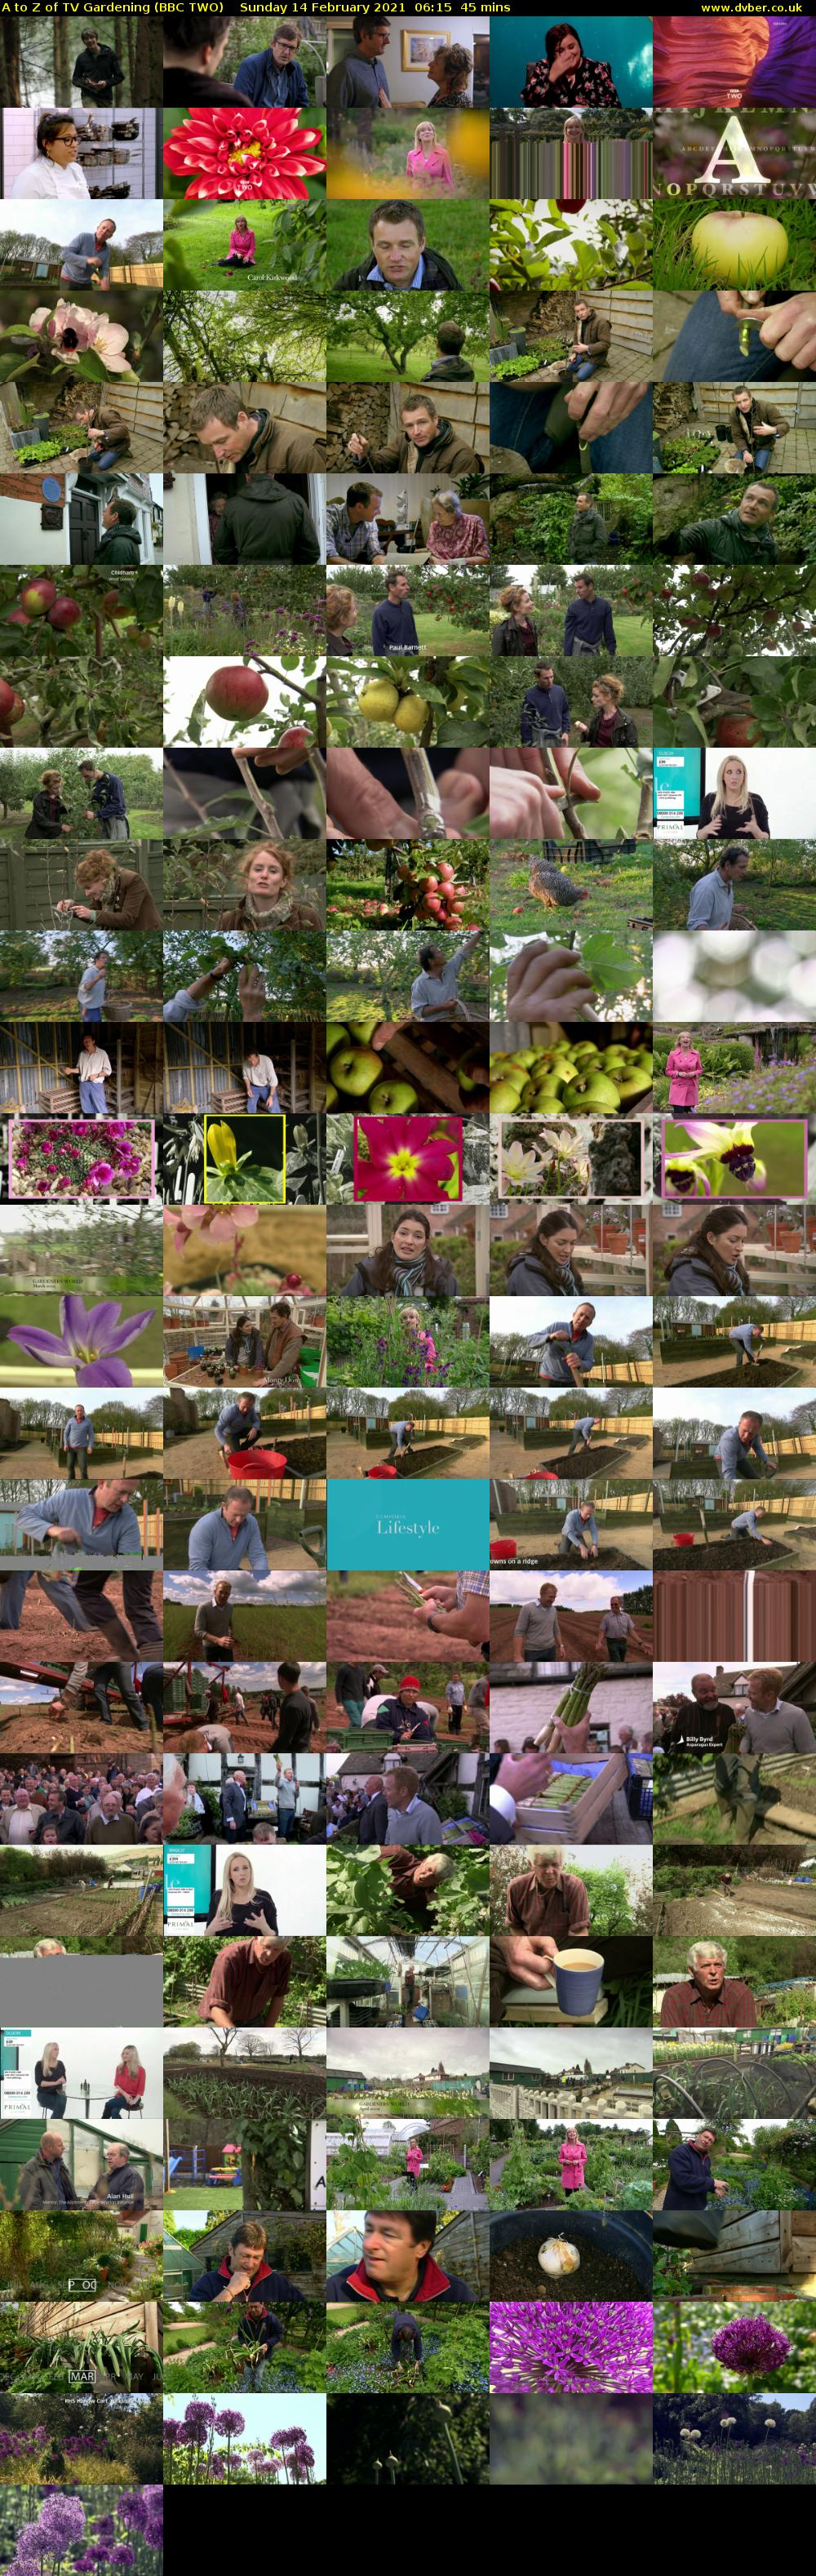 A to Z of TV Gardening (BBC TWO) Sunday 14 February 2021 06:15 - 07:00